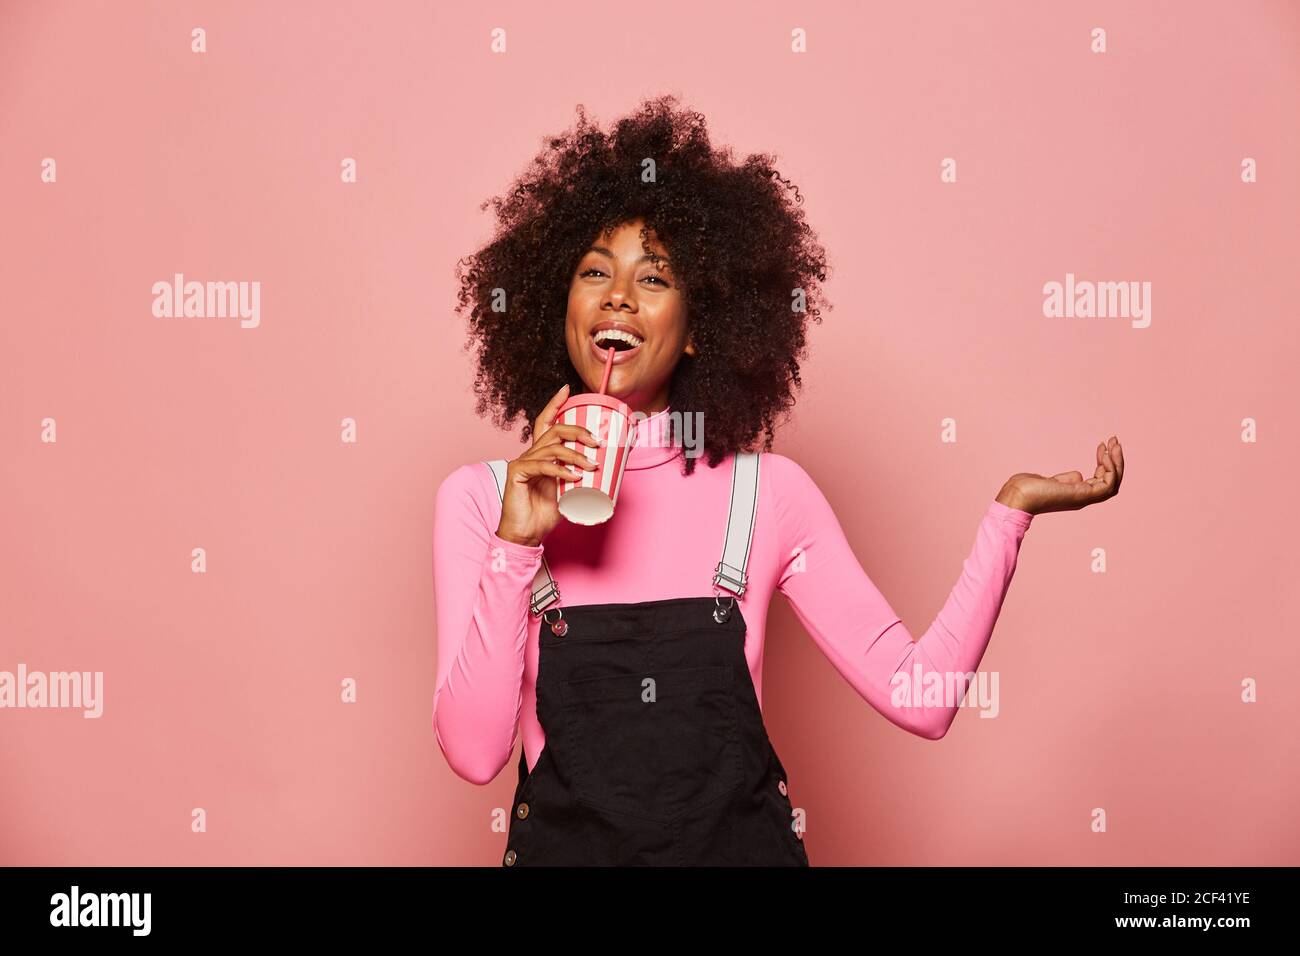 Joyful young African American female with curly hair wearing pink turtleneck and black overall holding white and pink striped disposable cup with straw and looking at camera Stock Photo